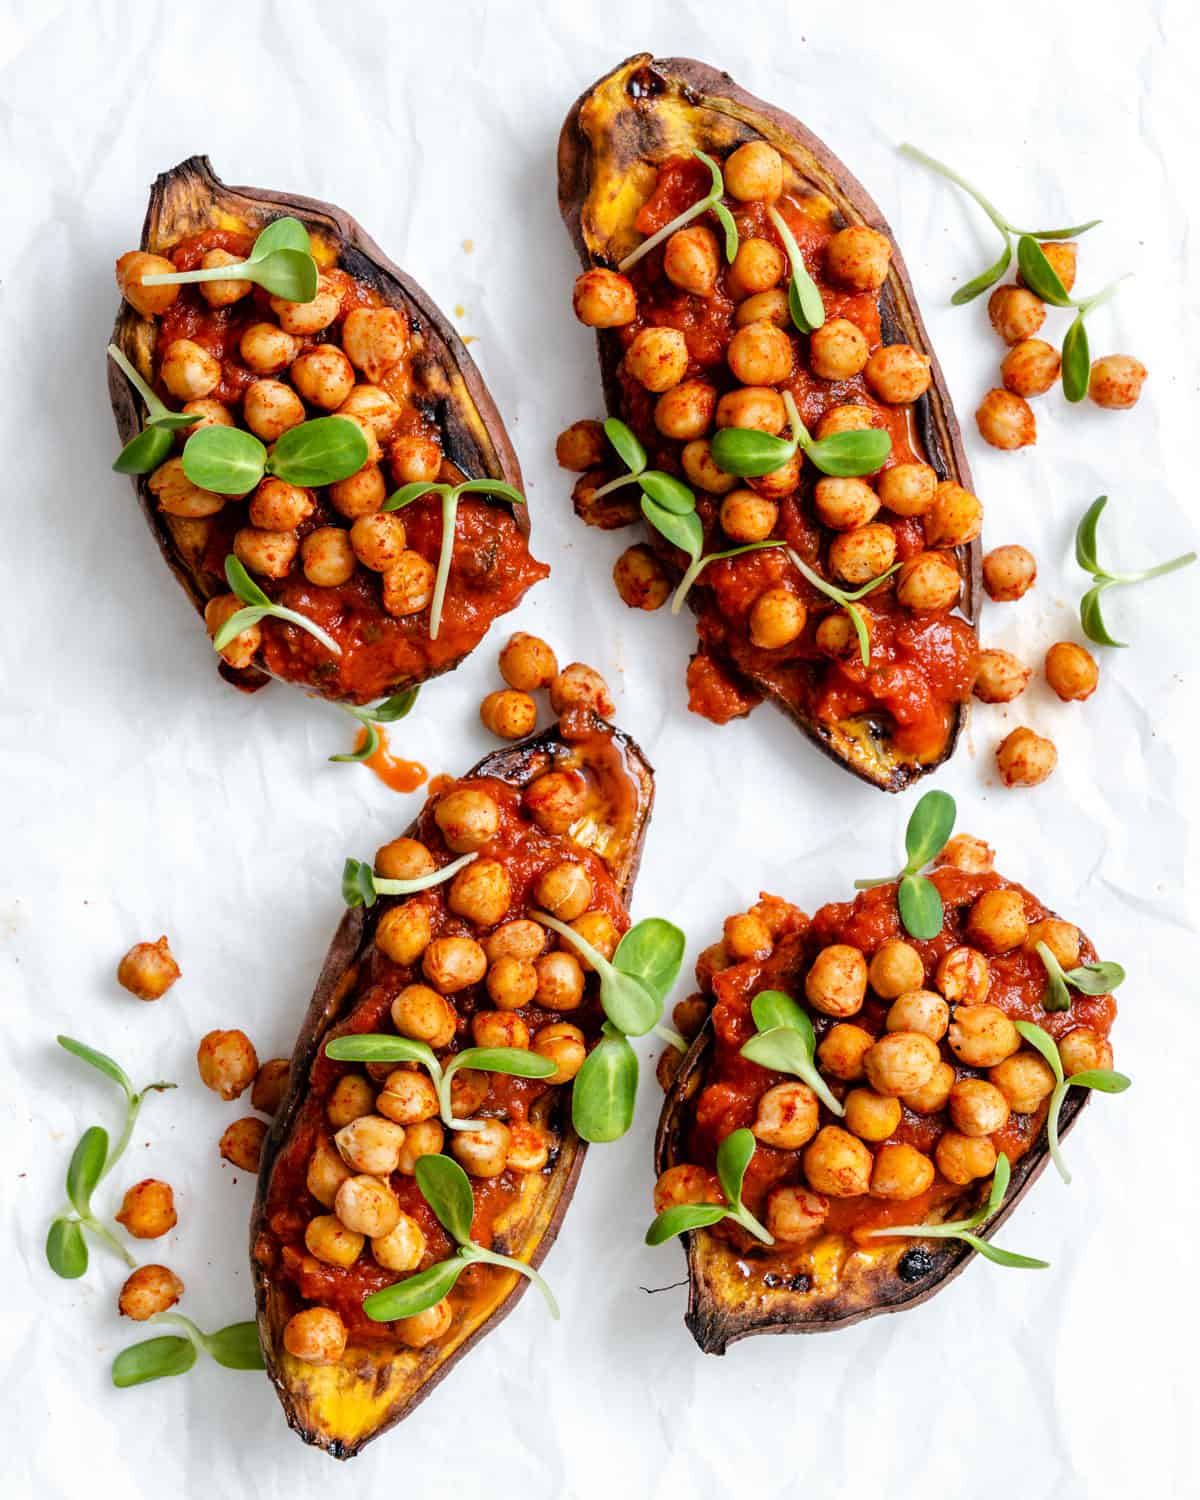 completed Chickpea Sweet Potato Boats a،nst a white surface